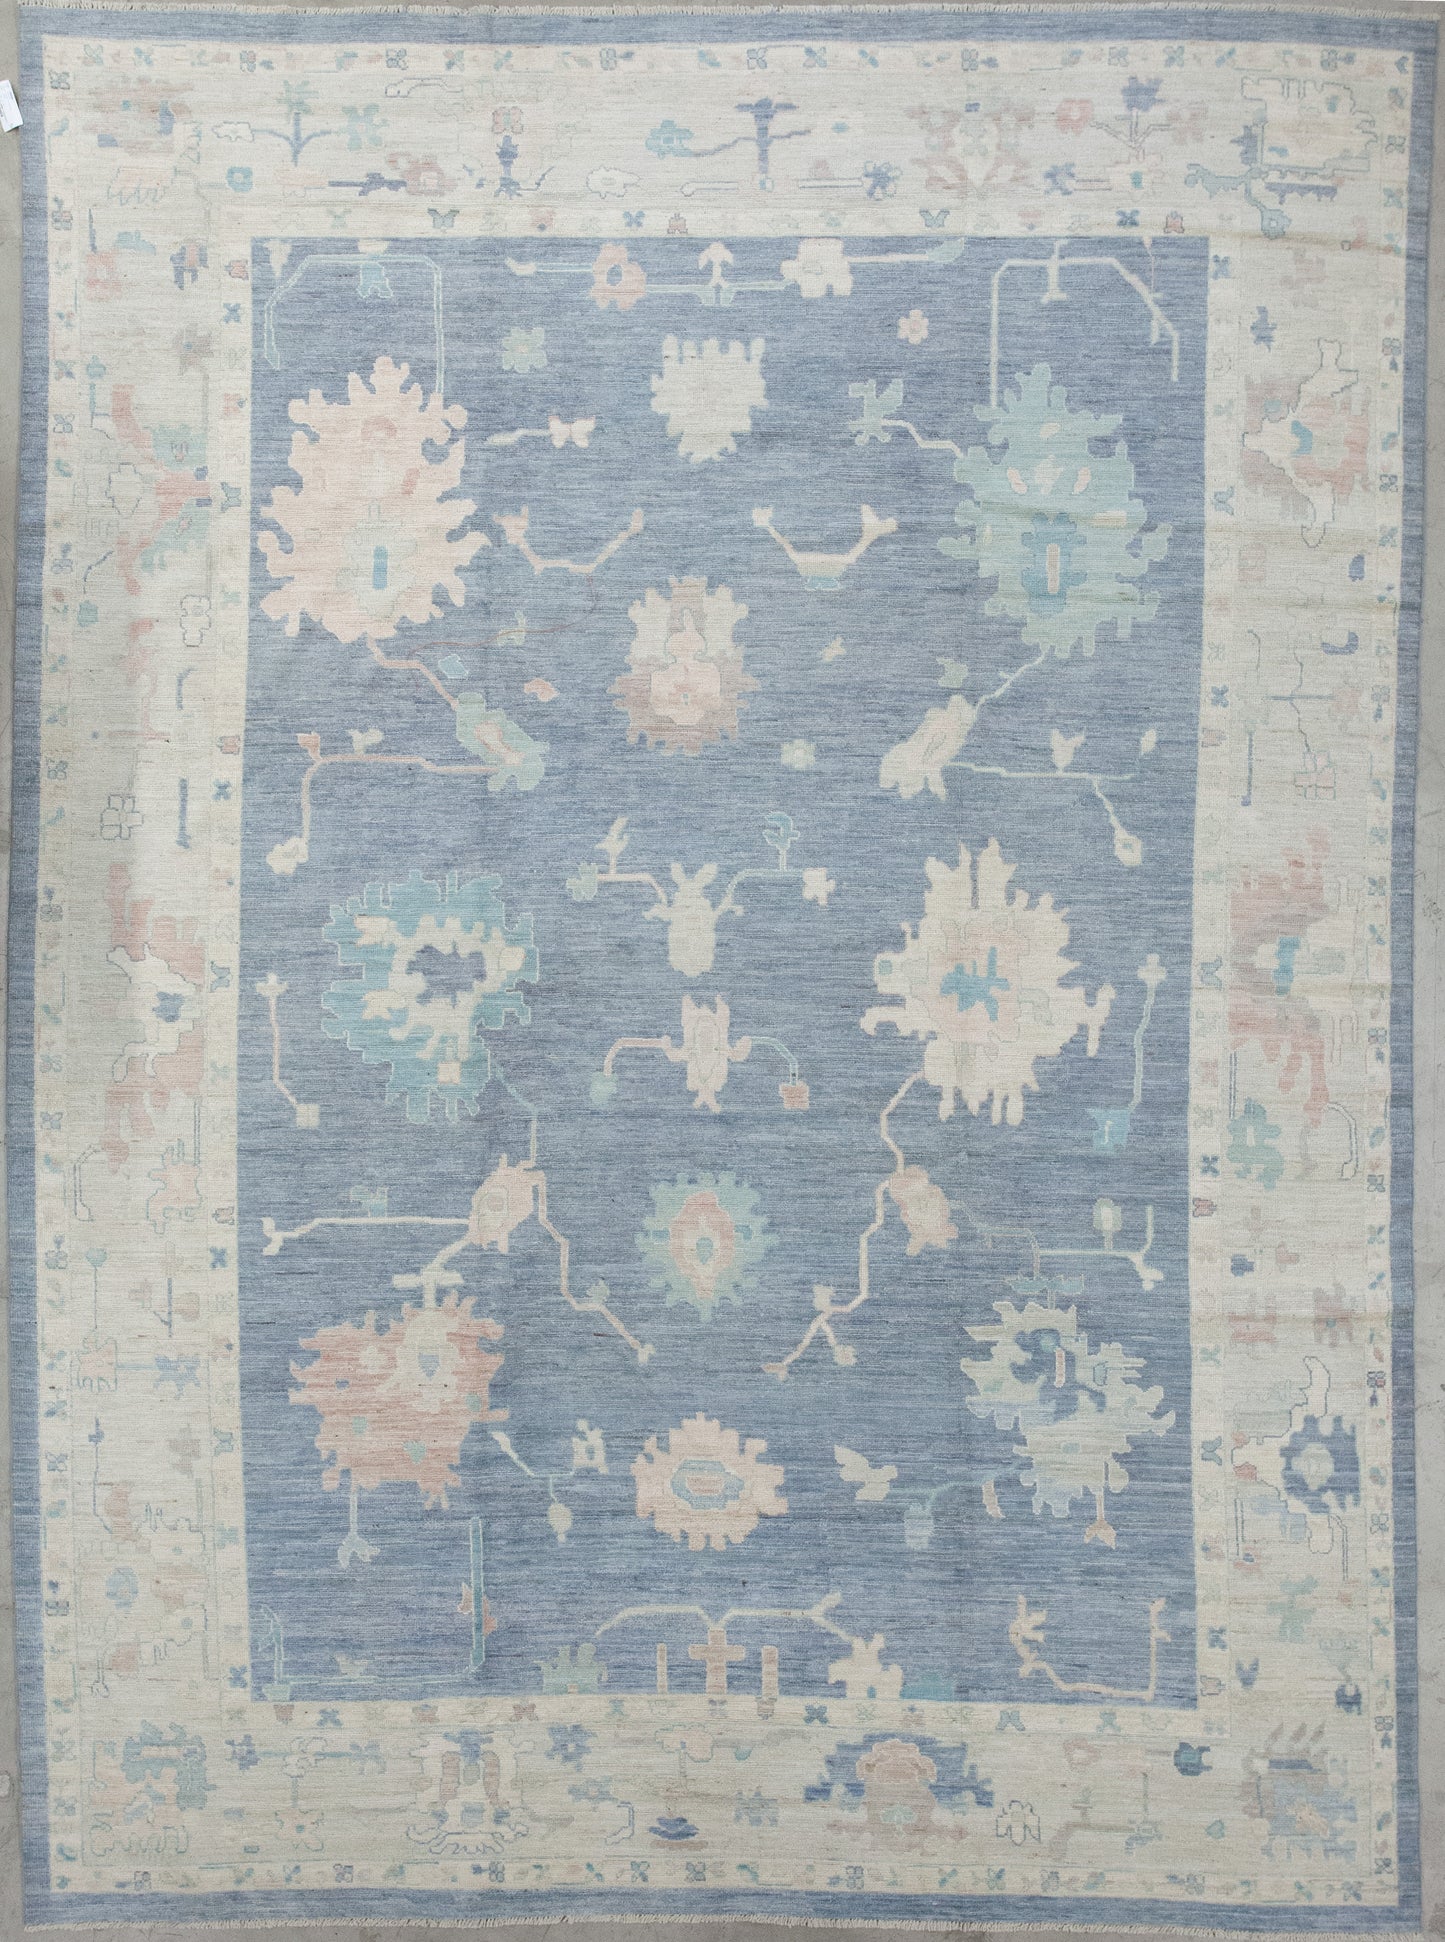 First-class rug has the beach vibe within its knots. The color scheme comes with blue, pearl, pinkish, and brown. In addition, the design renders big corals with small corals inside and a few linear thin branches around them. 